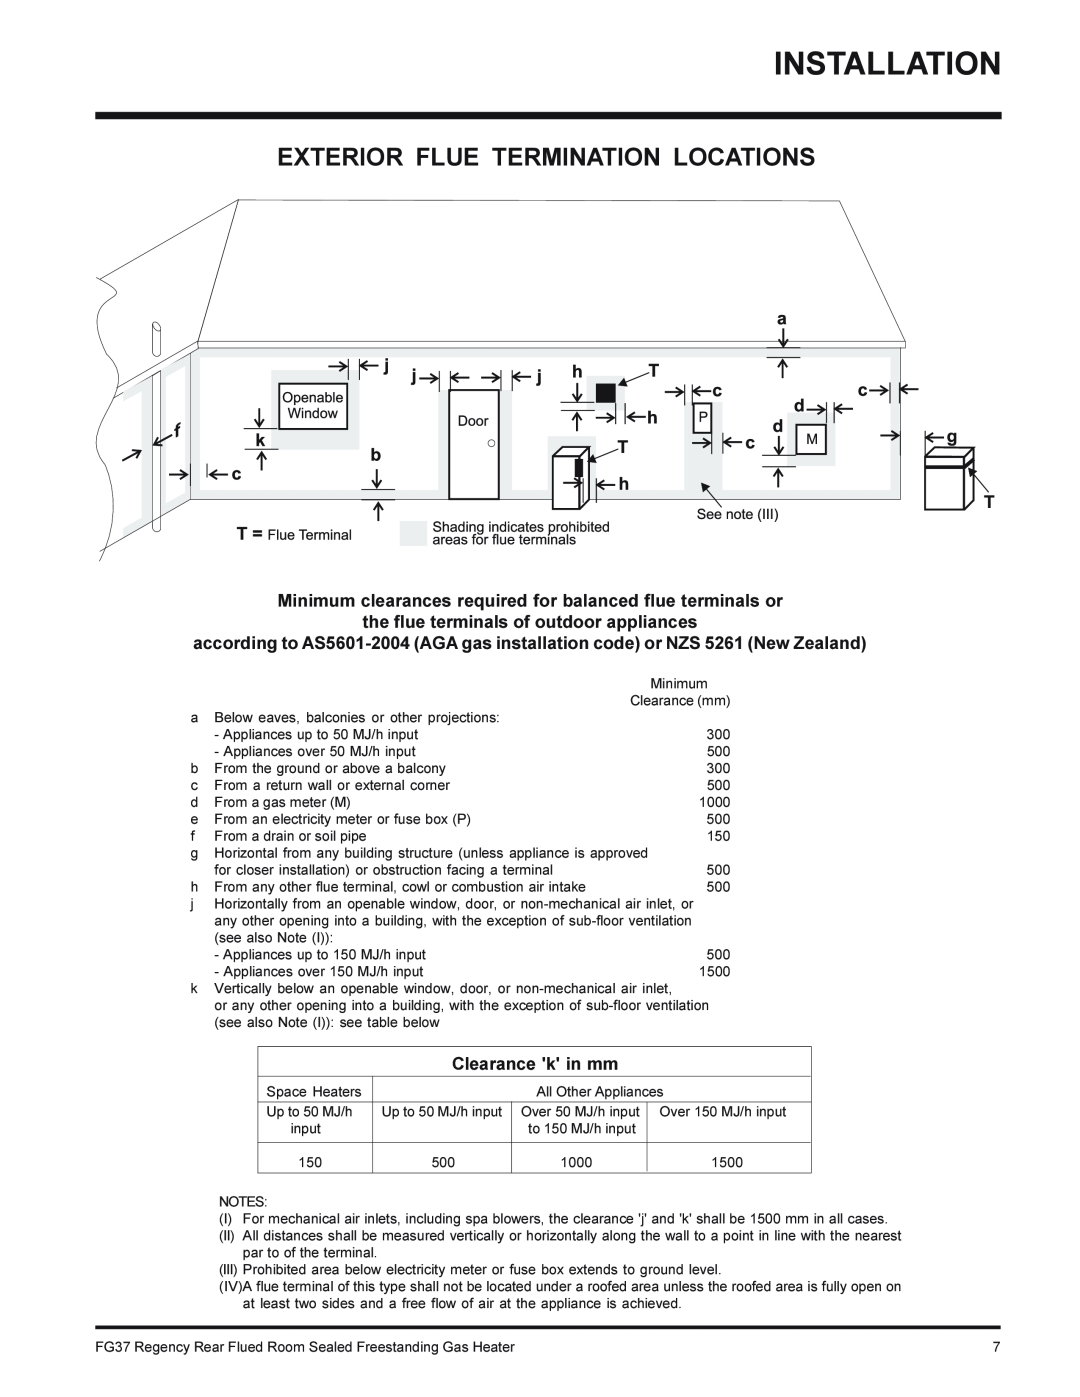 Regency FG37-NG, FG37-LPG Exterior Flue Termination Locations, the flue terminals of outdoor appliances, Clearance k in mm 